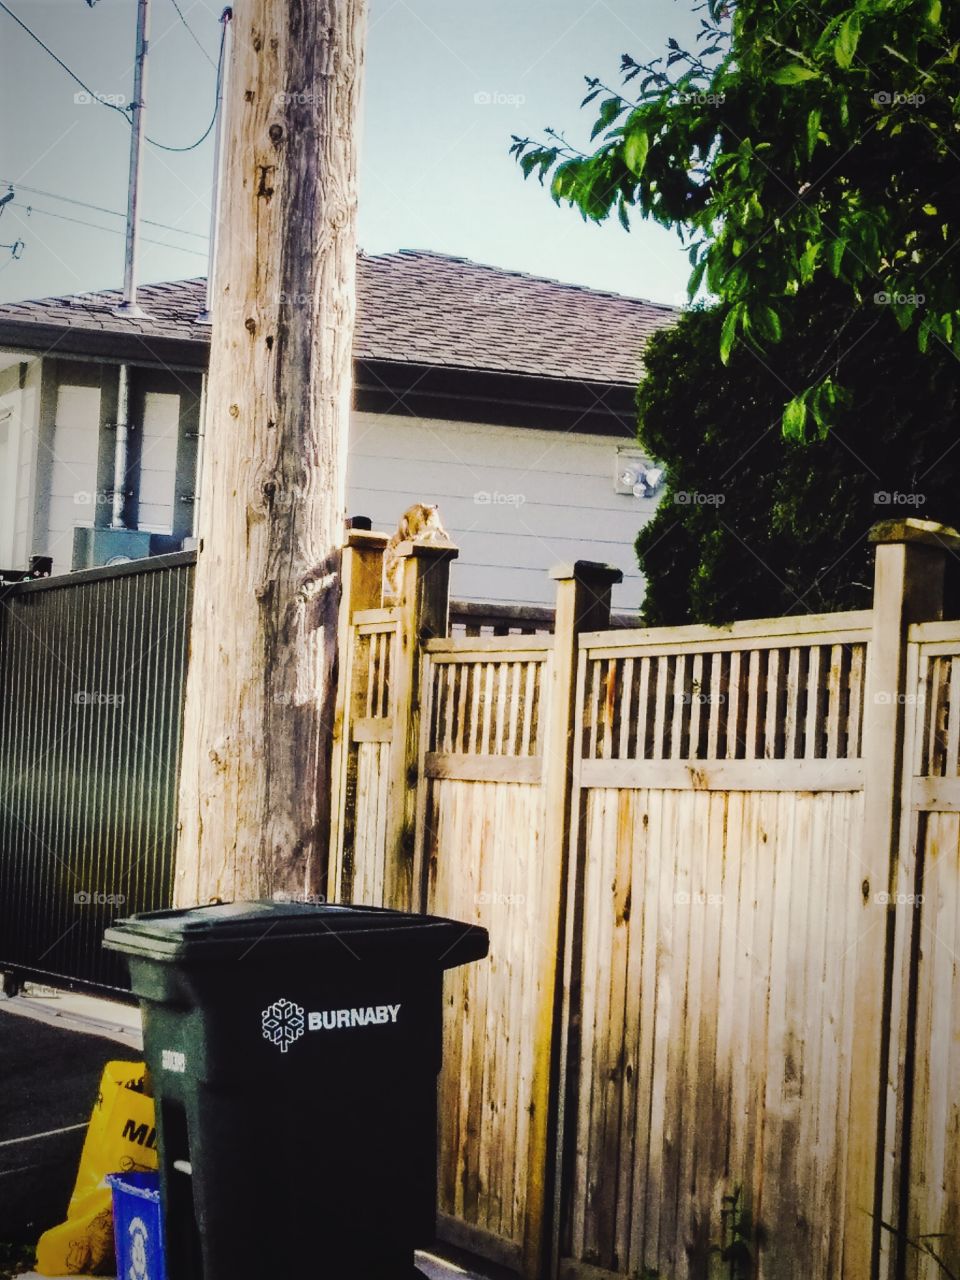 Little Chipmunk hopping around everywhere and looking at the local Burnaby Recycle Bin